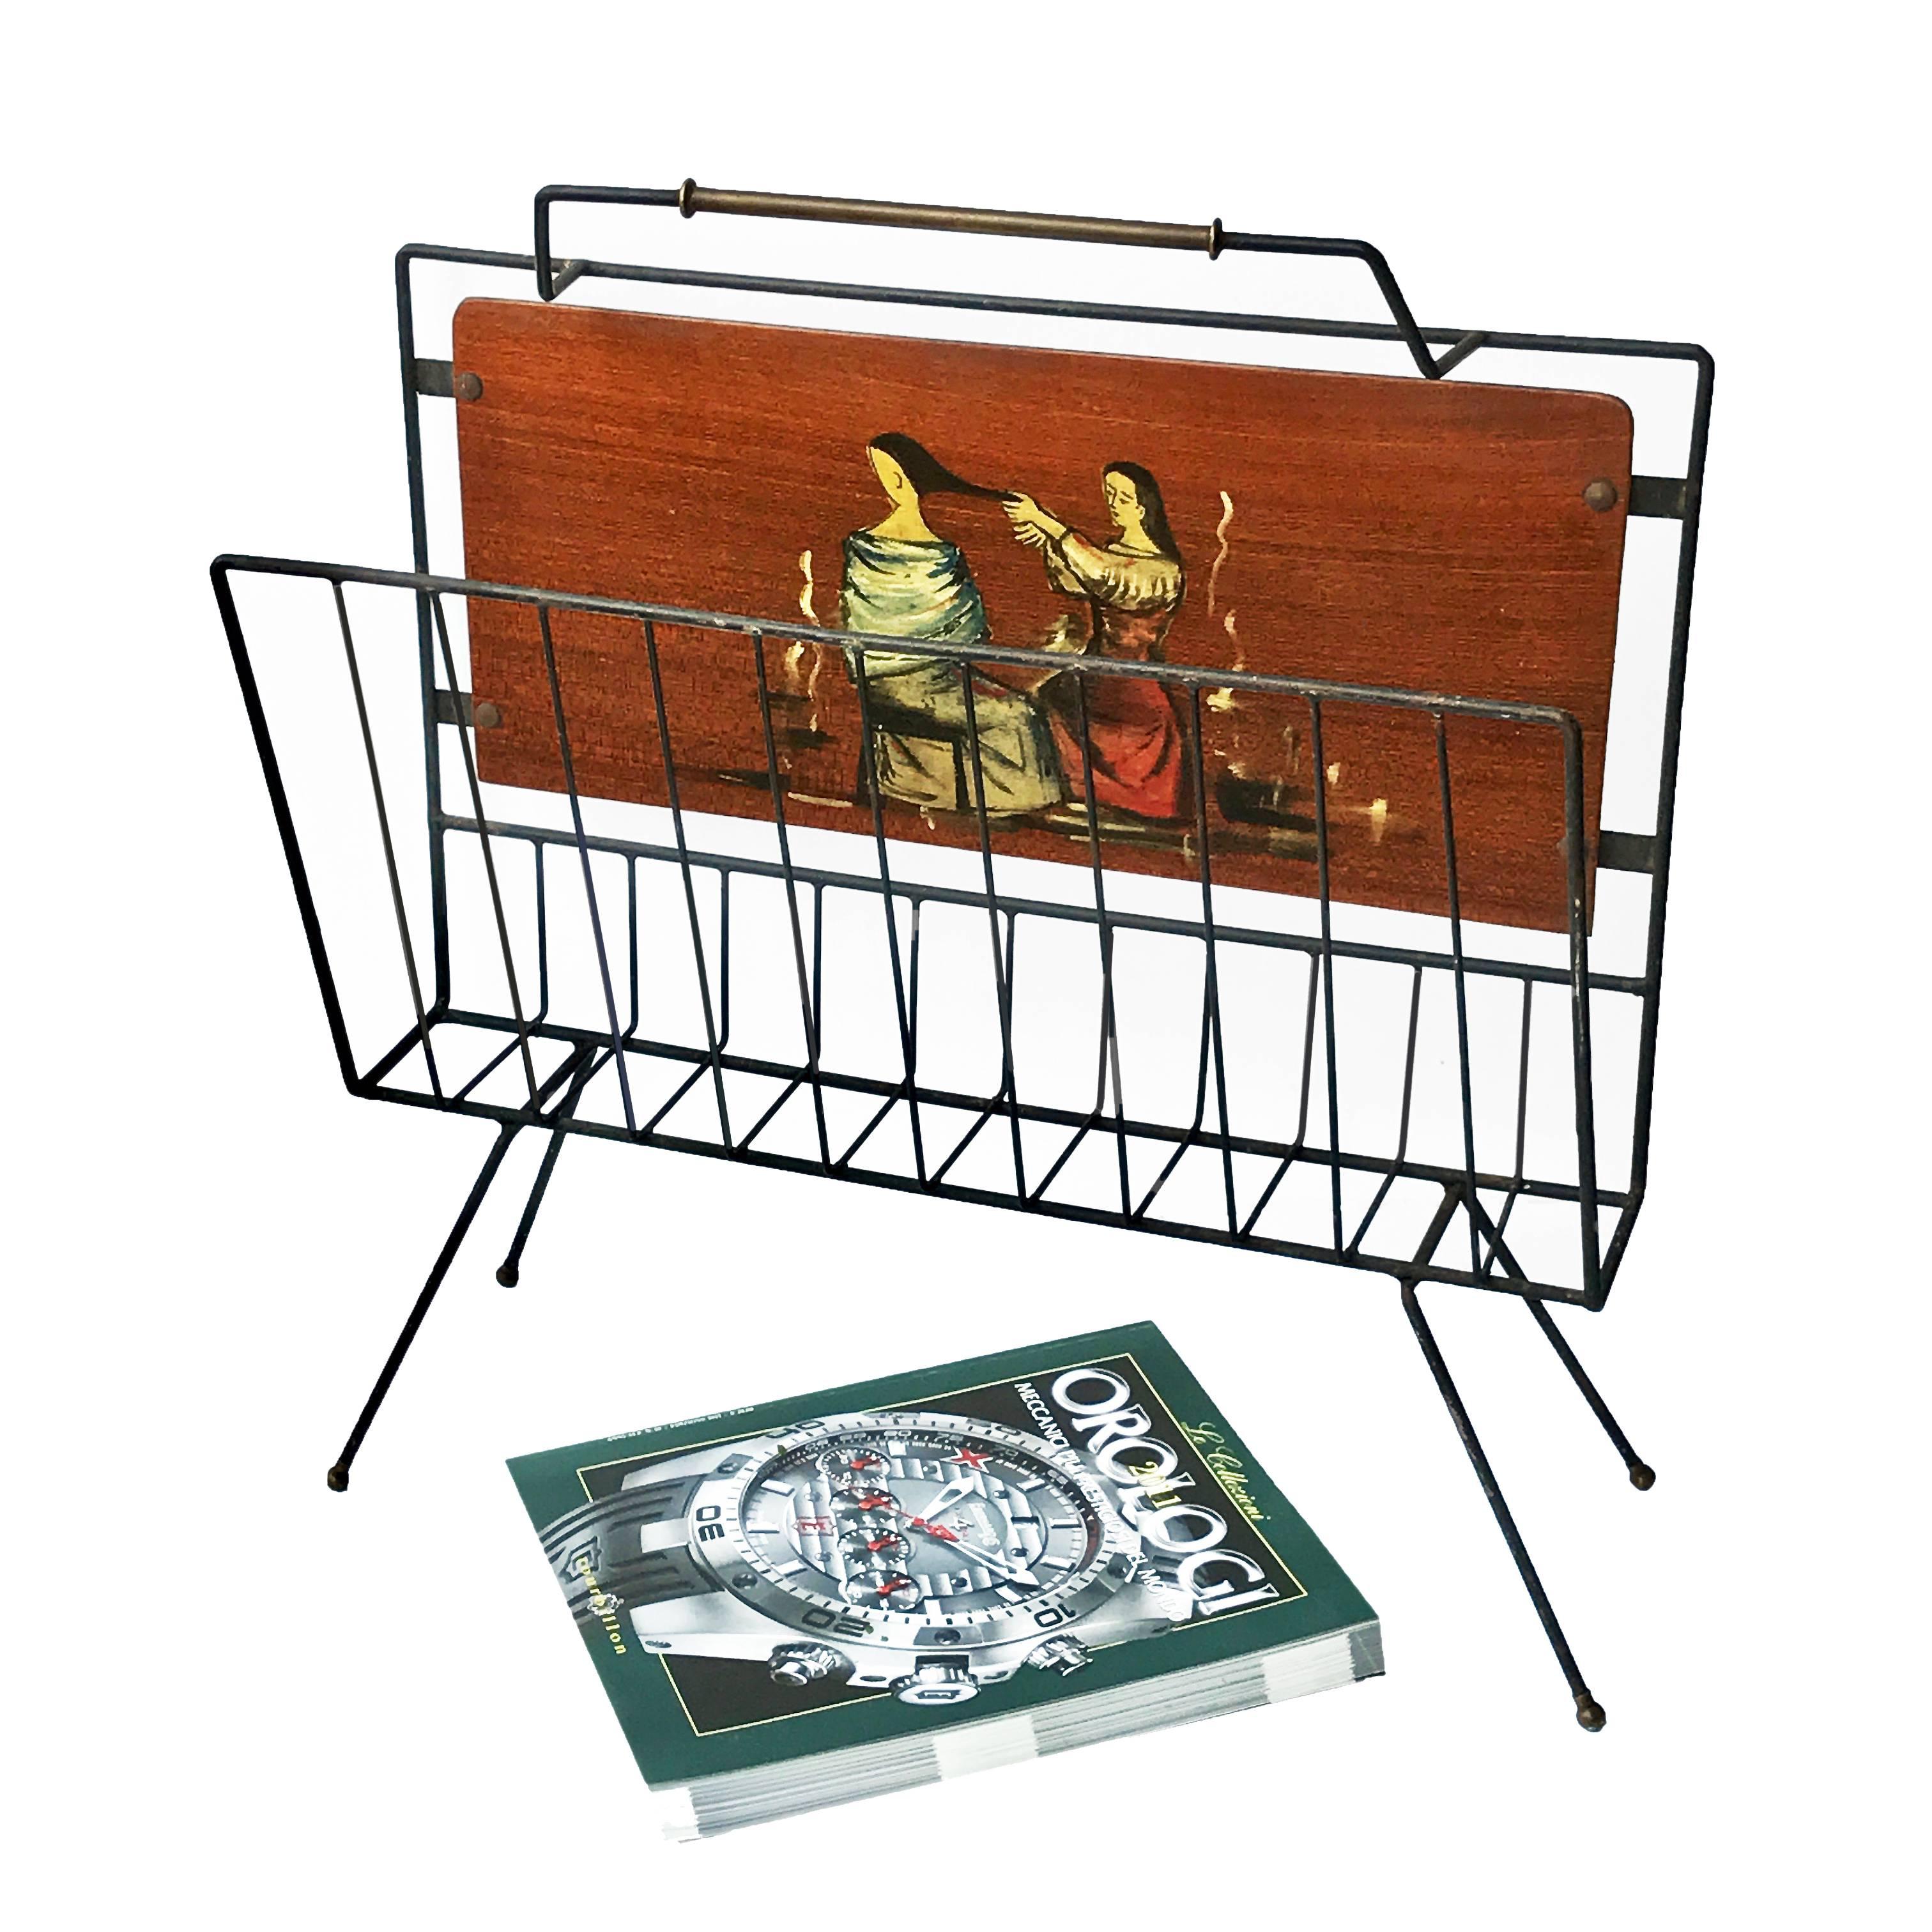 Magazine rack the enamelled iron and painted wood, 1950s.